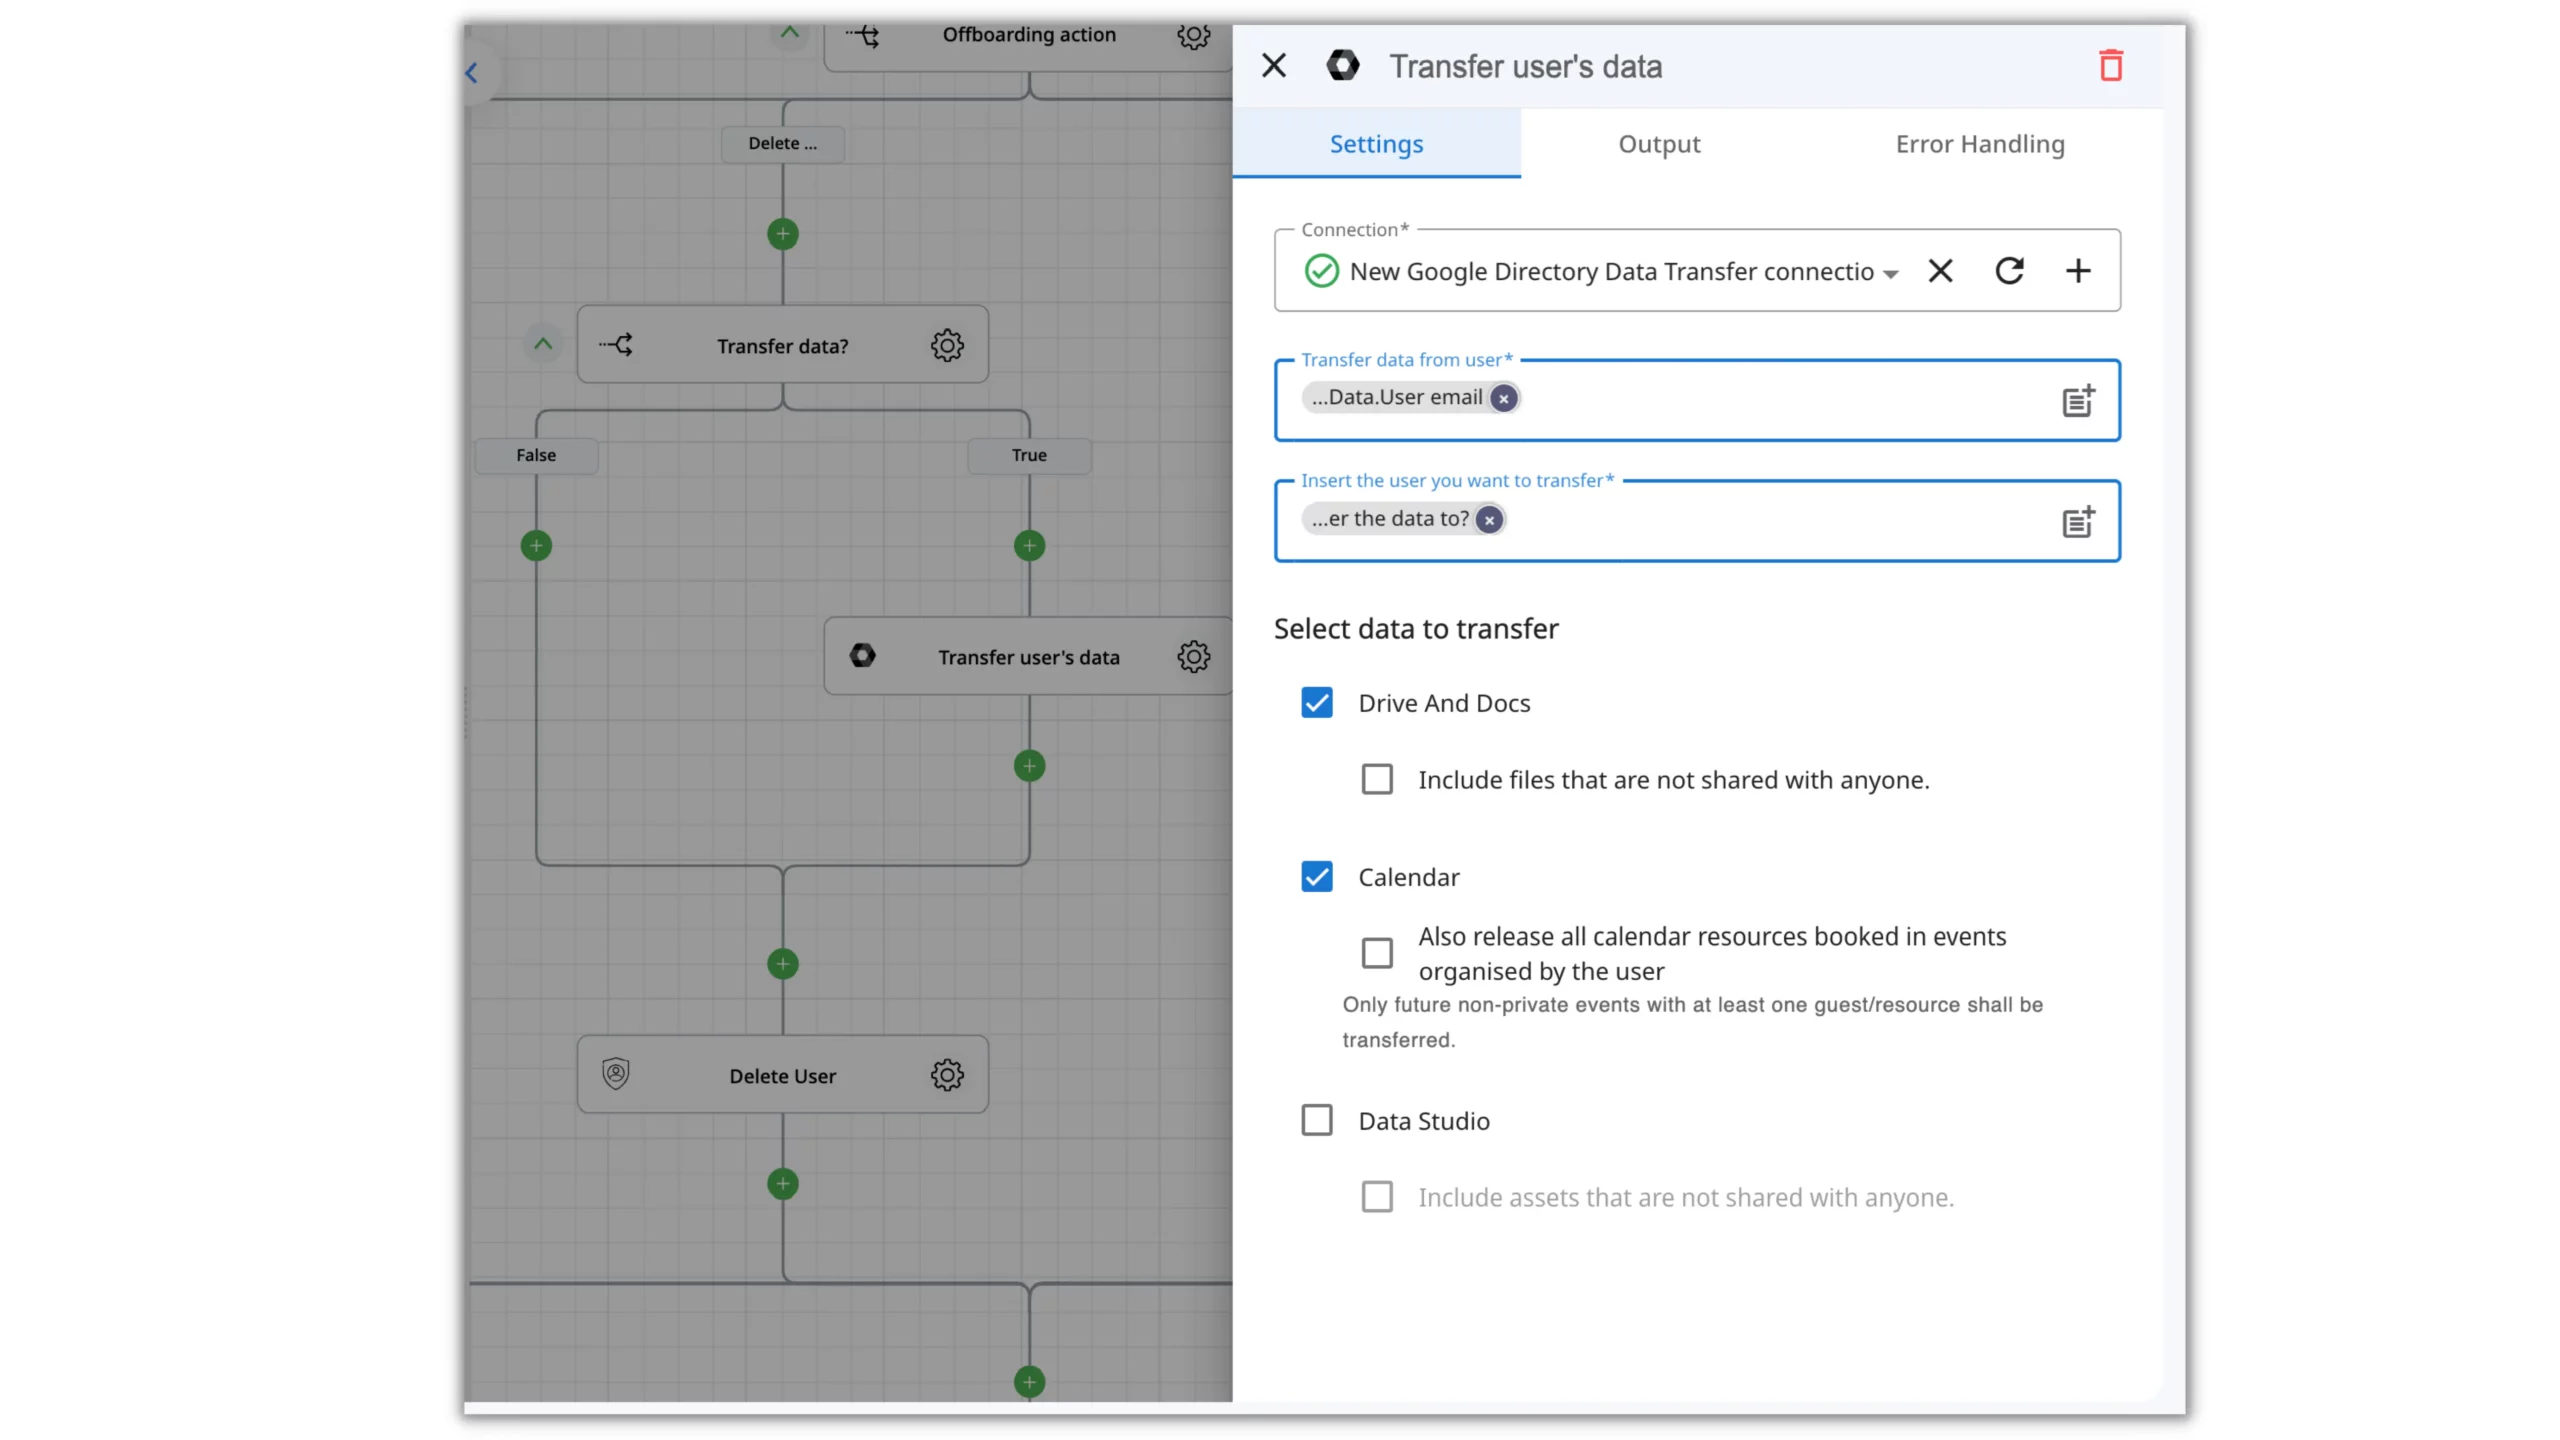 The demonstration of the "transfer user's data" action in the employee offboarding flow.